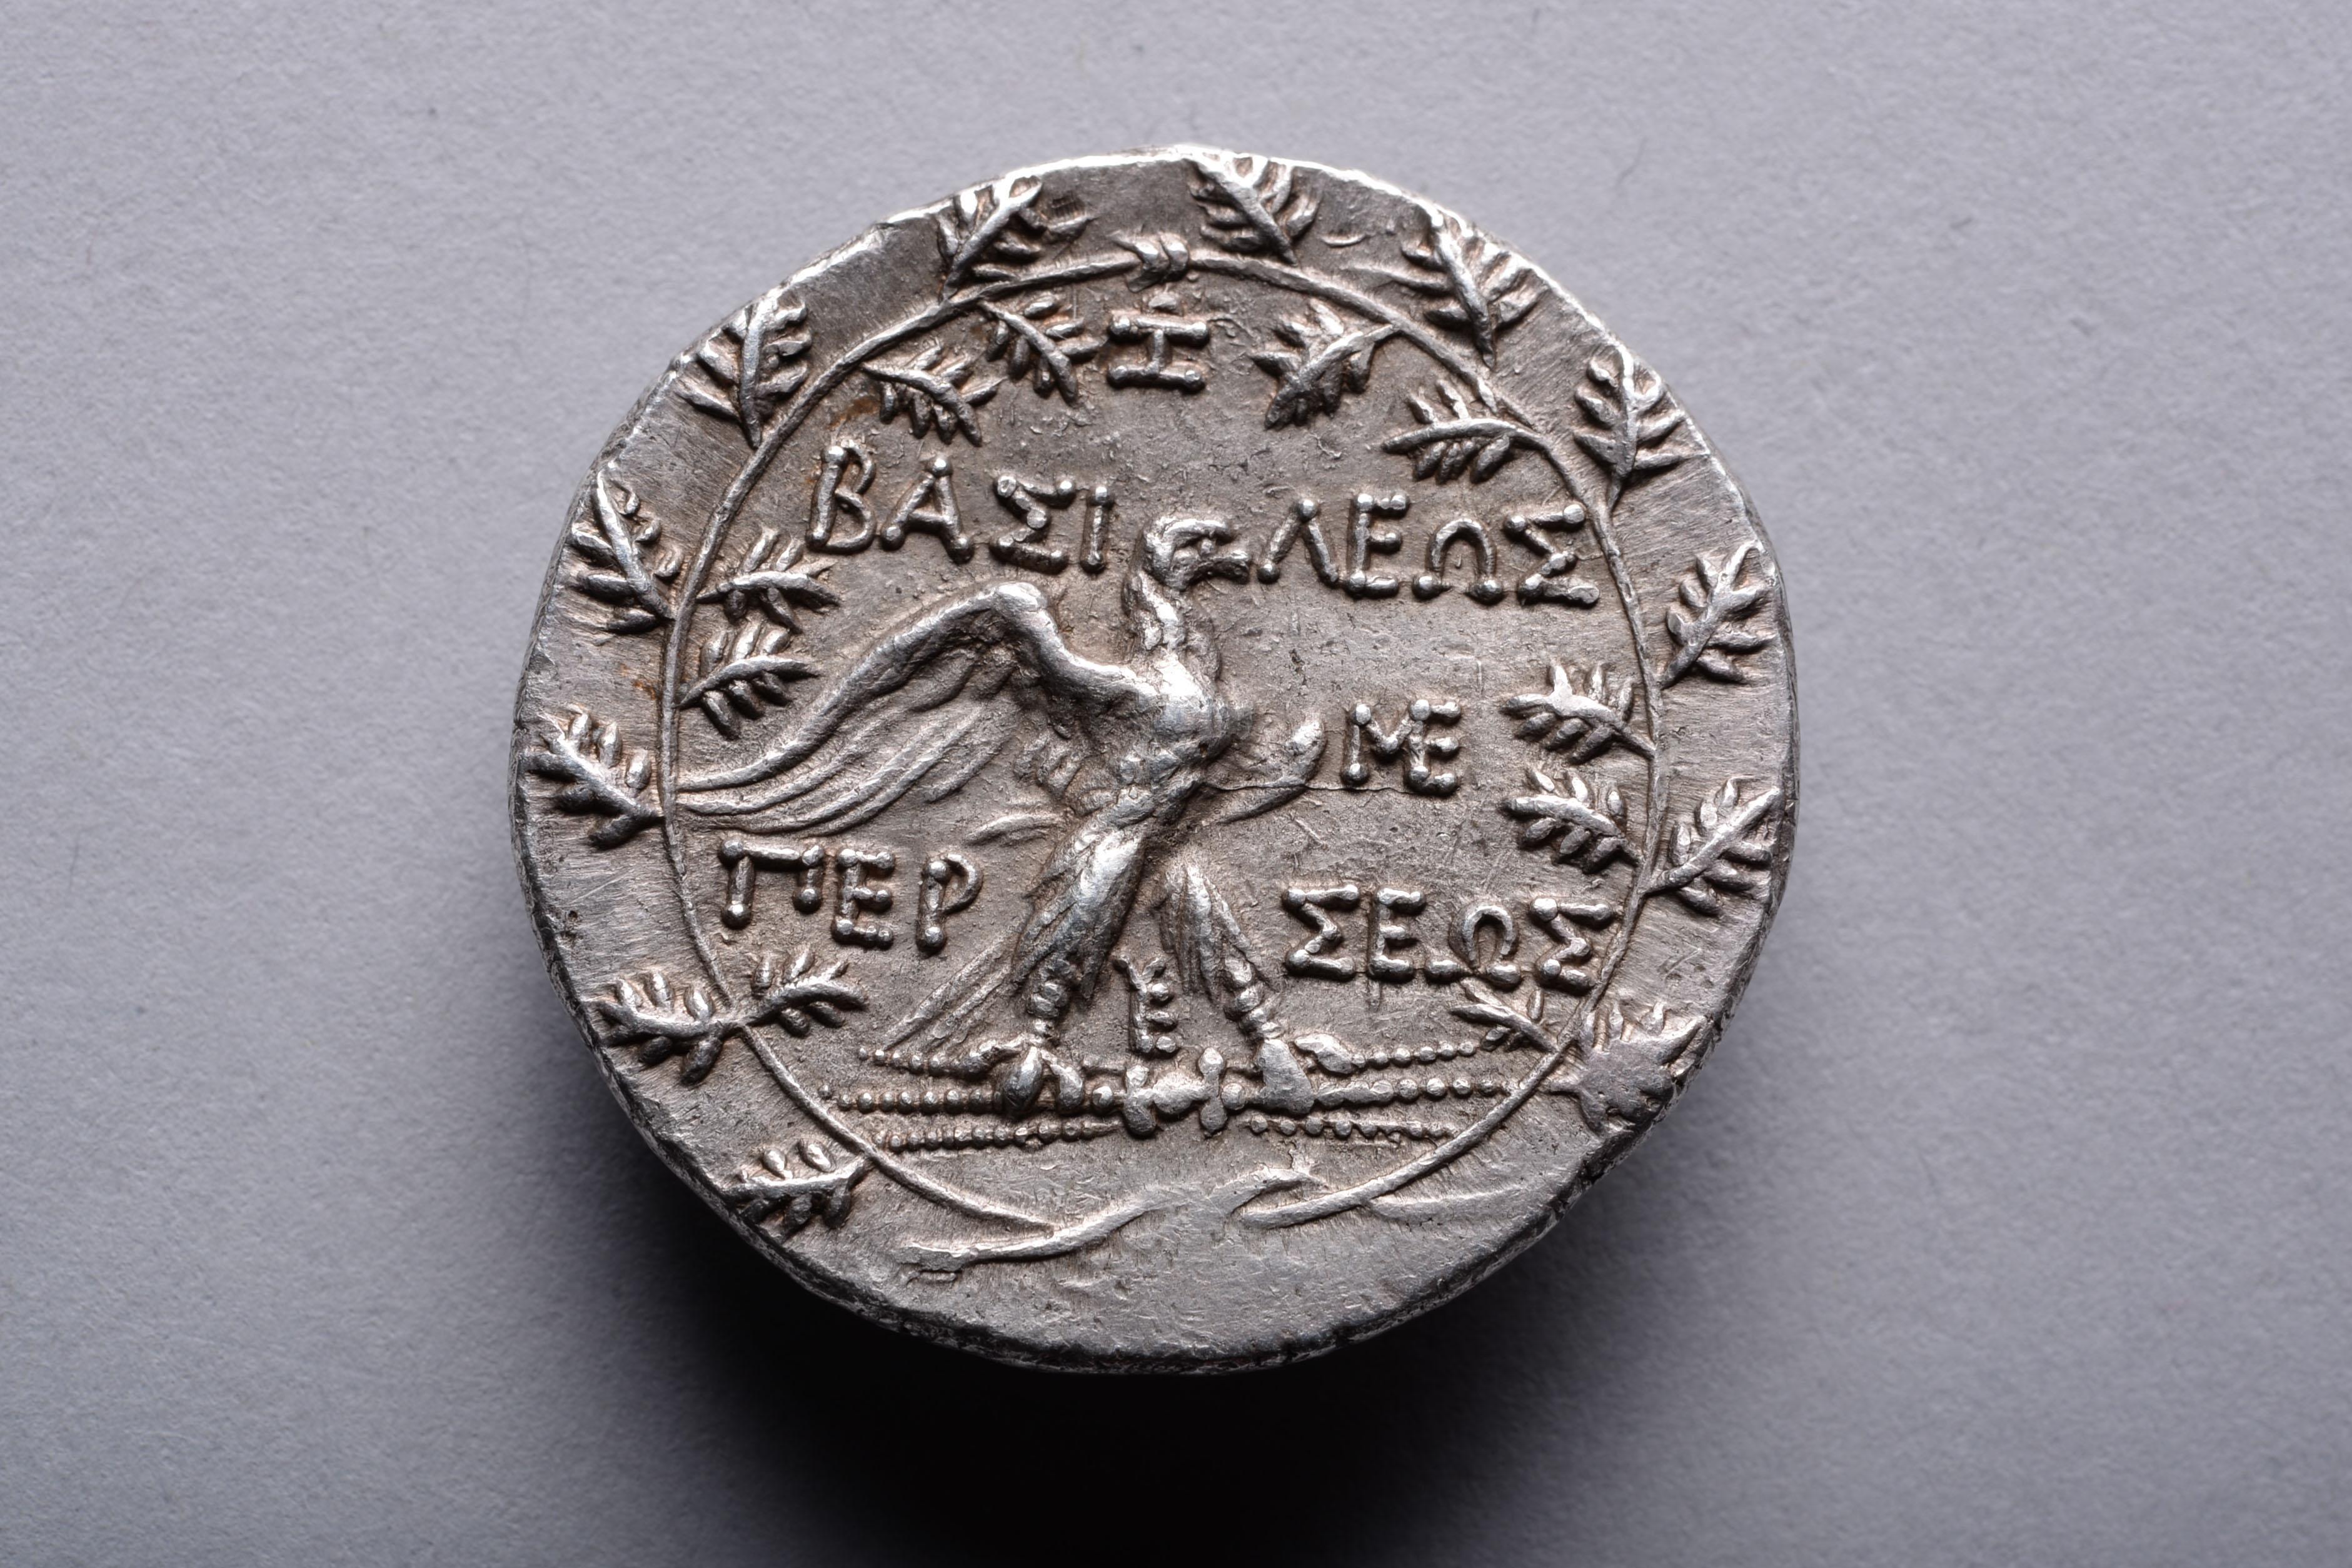 Silver tetradrachm minted under King Perseus of Macedon. Issued under magistrate Zoilos at the Pella or Amphipolis mint, circa 178-168 BC.

The obverse with the head of Perseus with short beard and furrowed brow, a diadem cutting through the rough